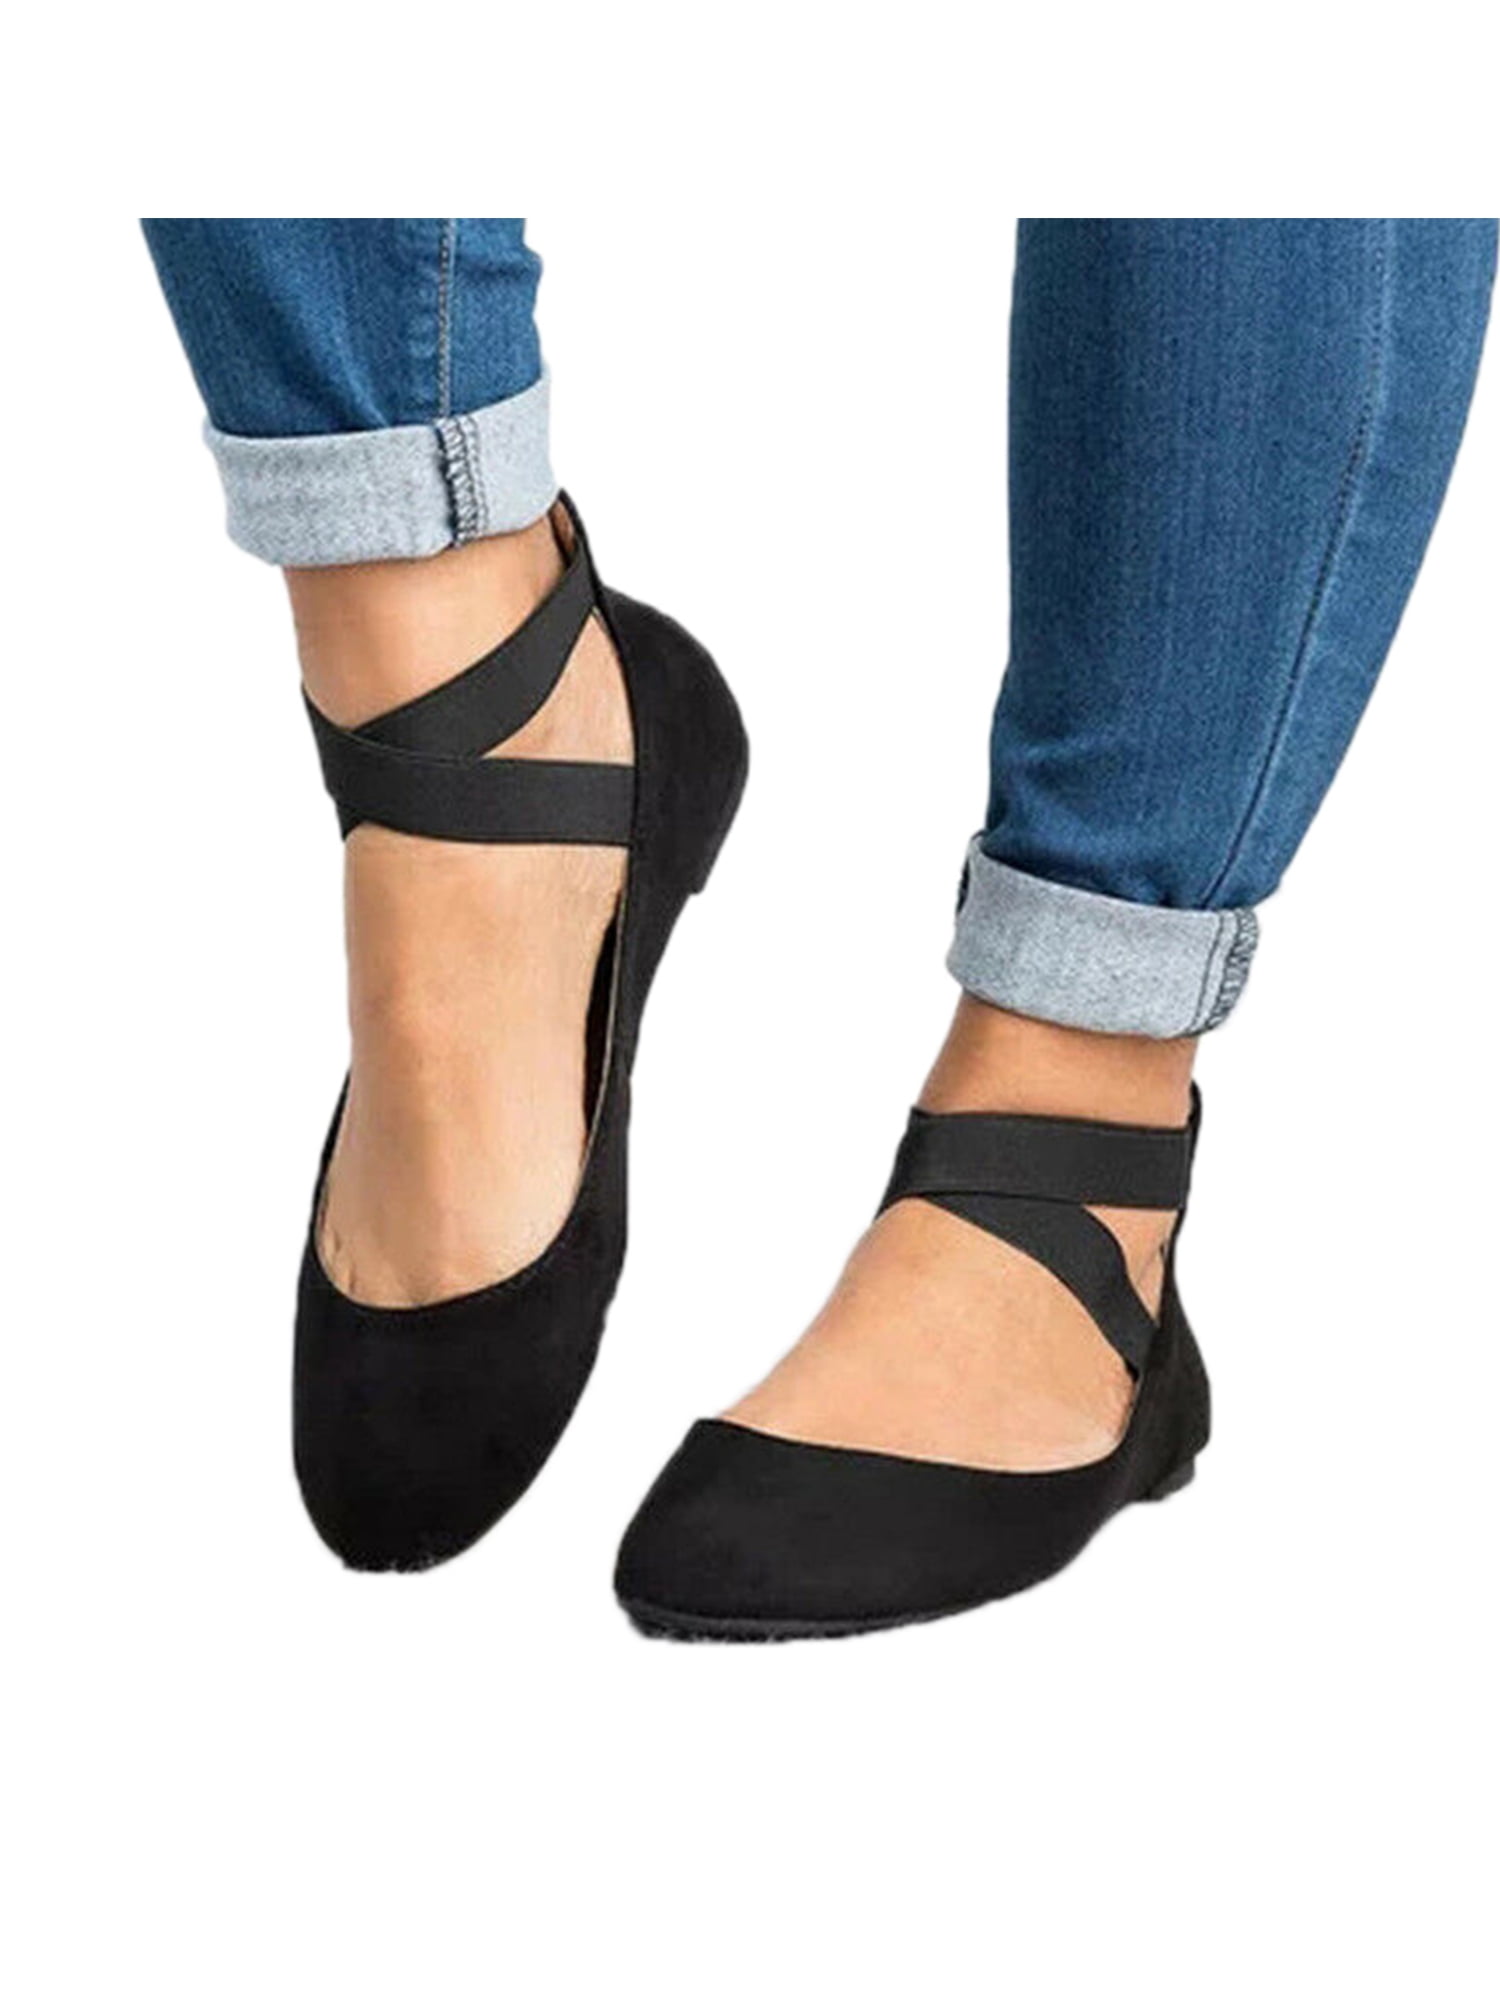 Womens Comfy Ankle Strap Slip On Pumps Ballet Dolly Flats Ballerina Dance Shoes 